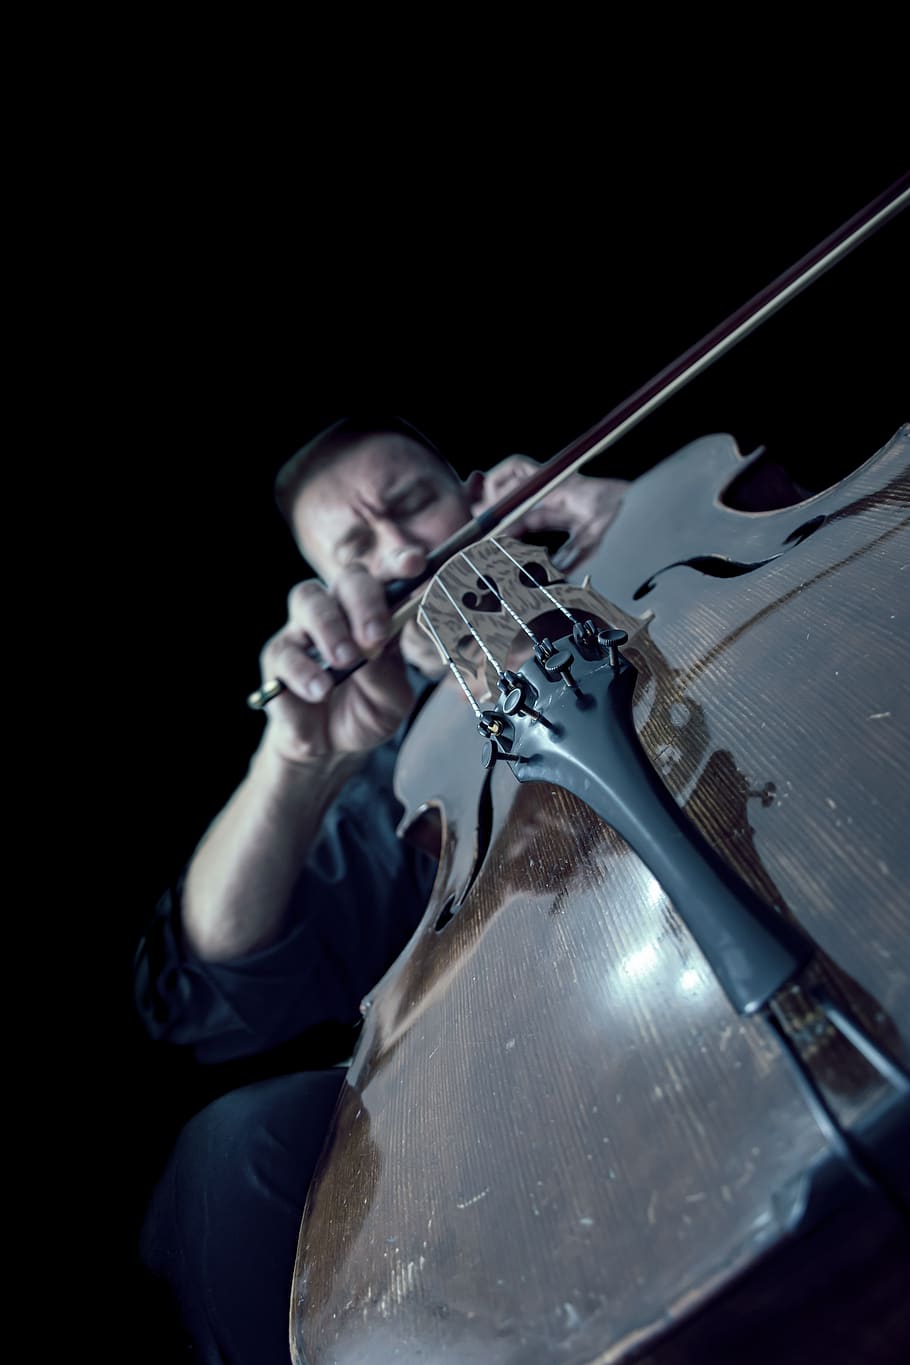 cello, performance, orchestra, music, instrument, symphony, talent, fingerboard, bass, bow